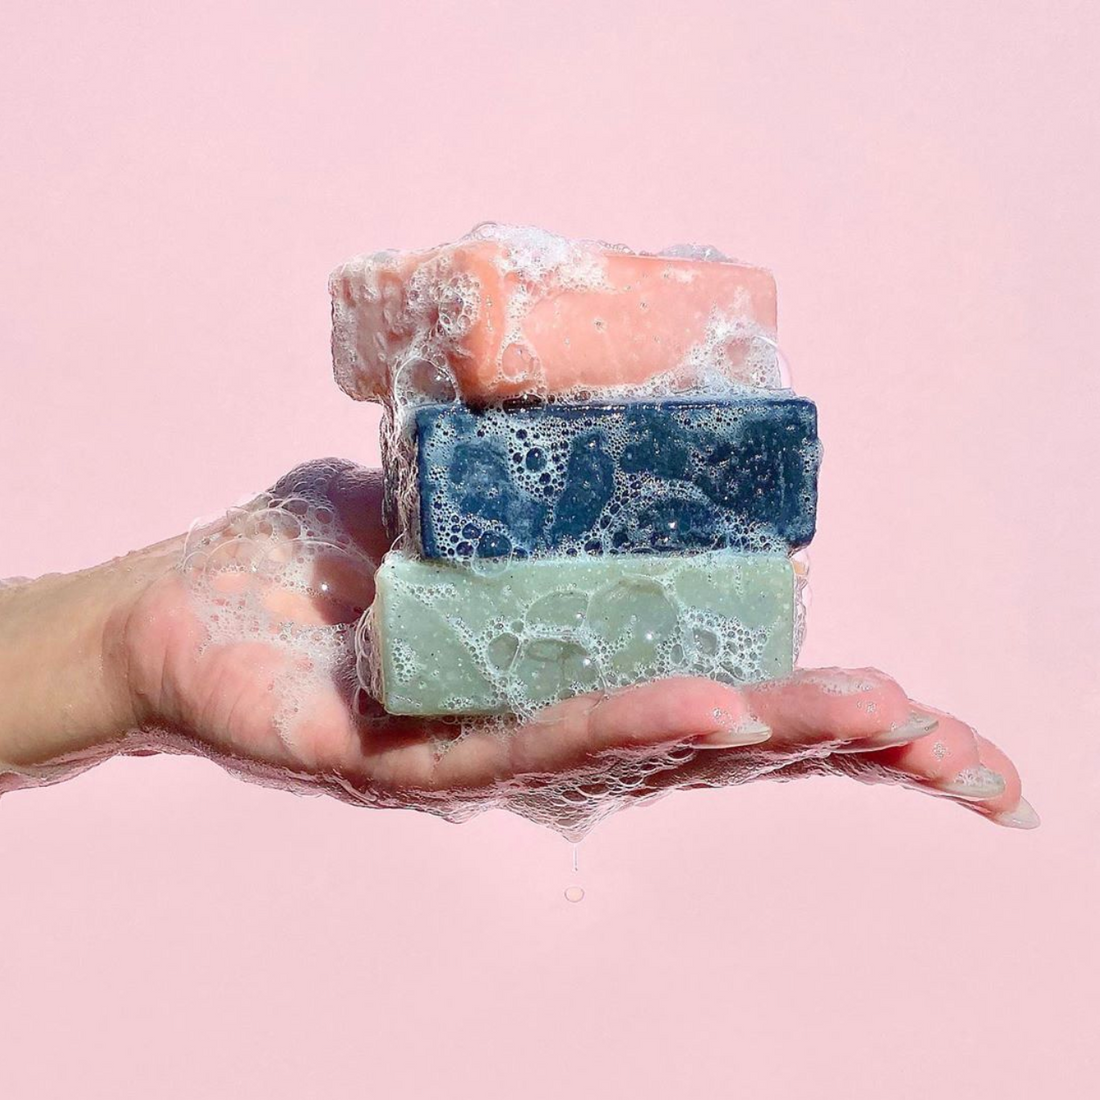 Apply a little indulgence in your day-to-day with Herbivore's bar soaps!